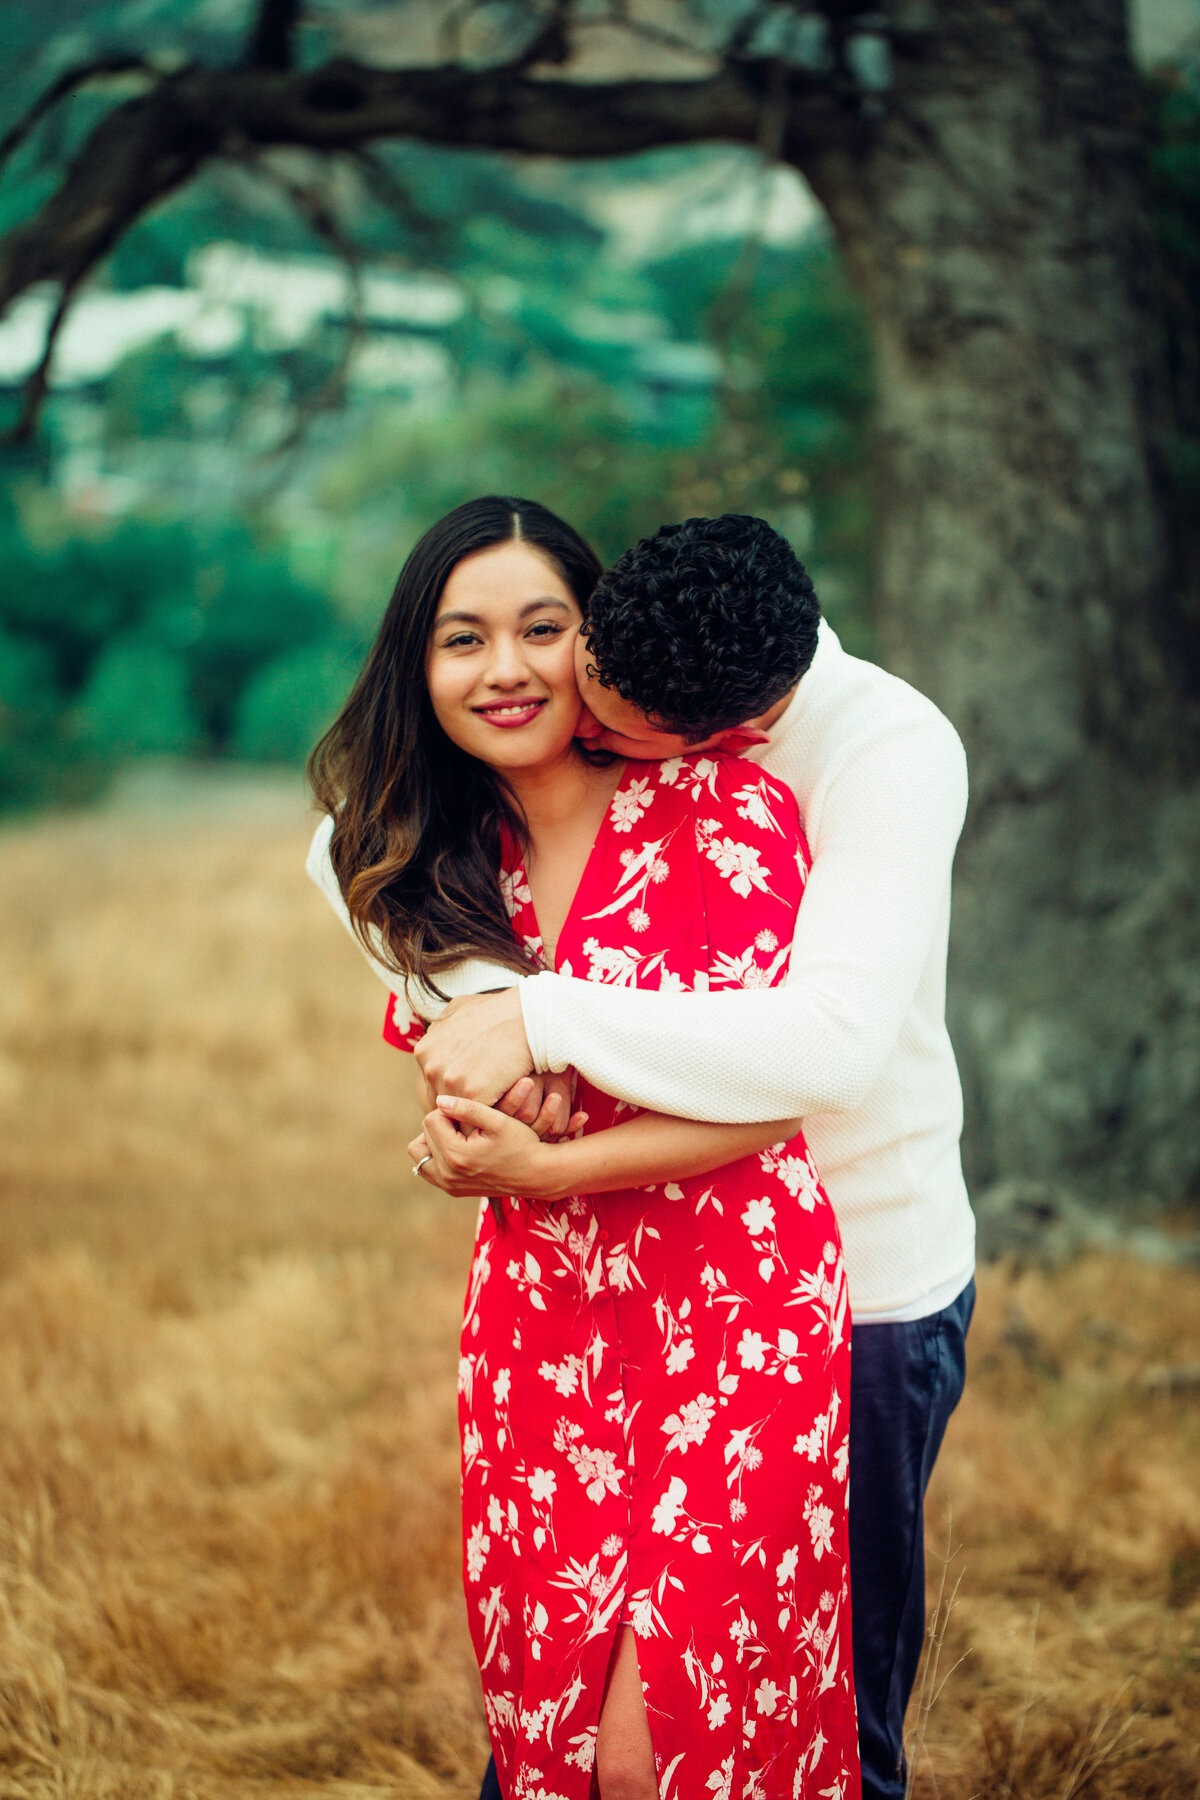 Engagement Photograph Of  Man In White Long Sleeves Hugging a Woman In Red Dress Los Angeles